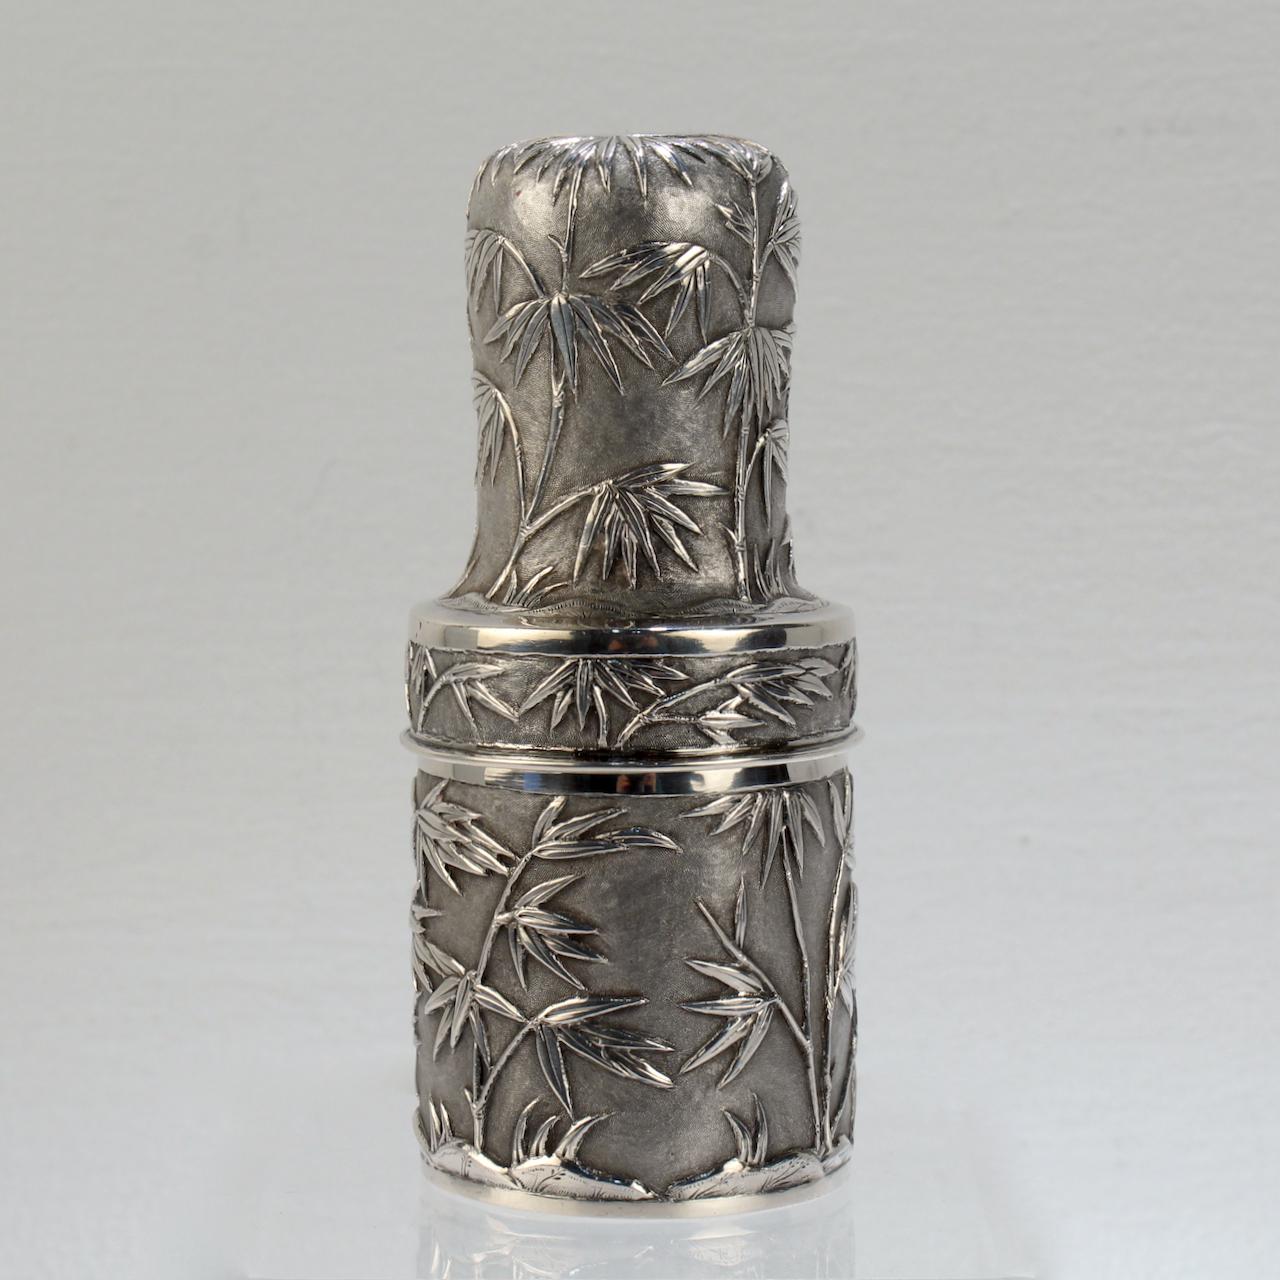 A fine antique Chinese Export silver cased travel dresser bottle.

The interior housing is an English glass dresser bottle with a stopper.

The exterior consisting of a hand made conforming thread base and cover. Decorated with high relief bamboo